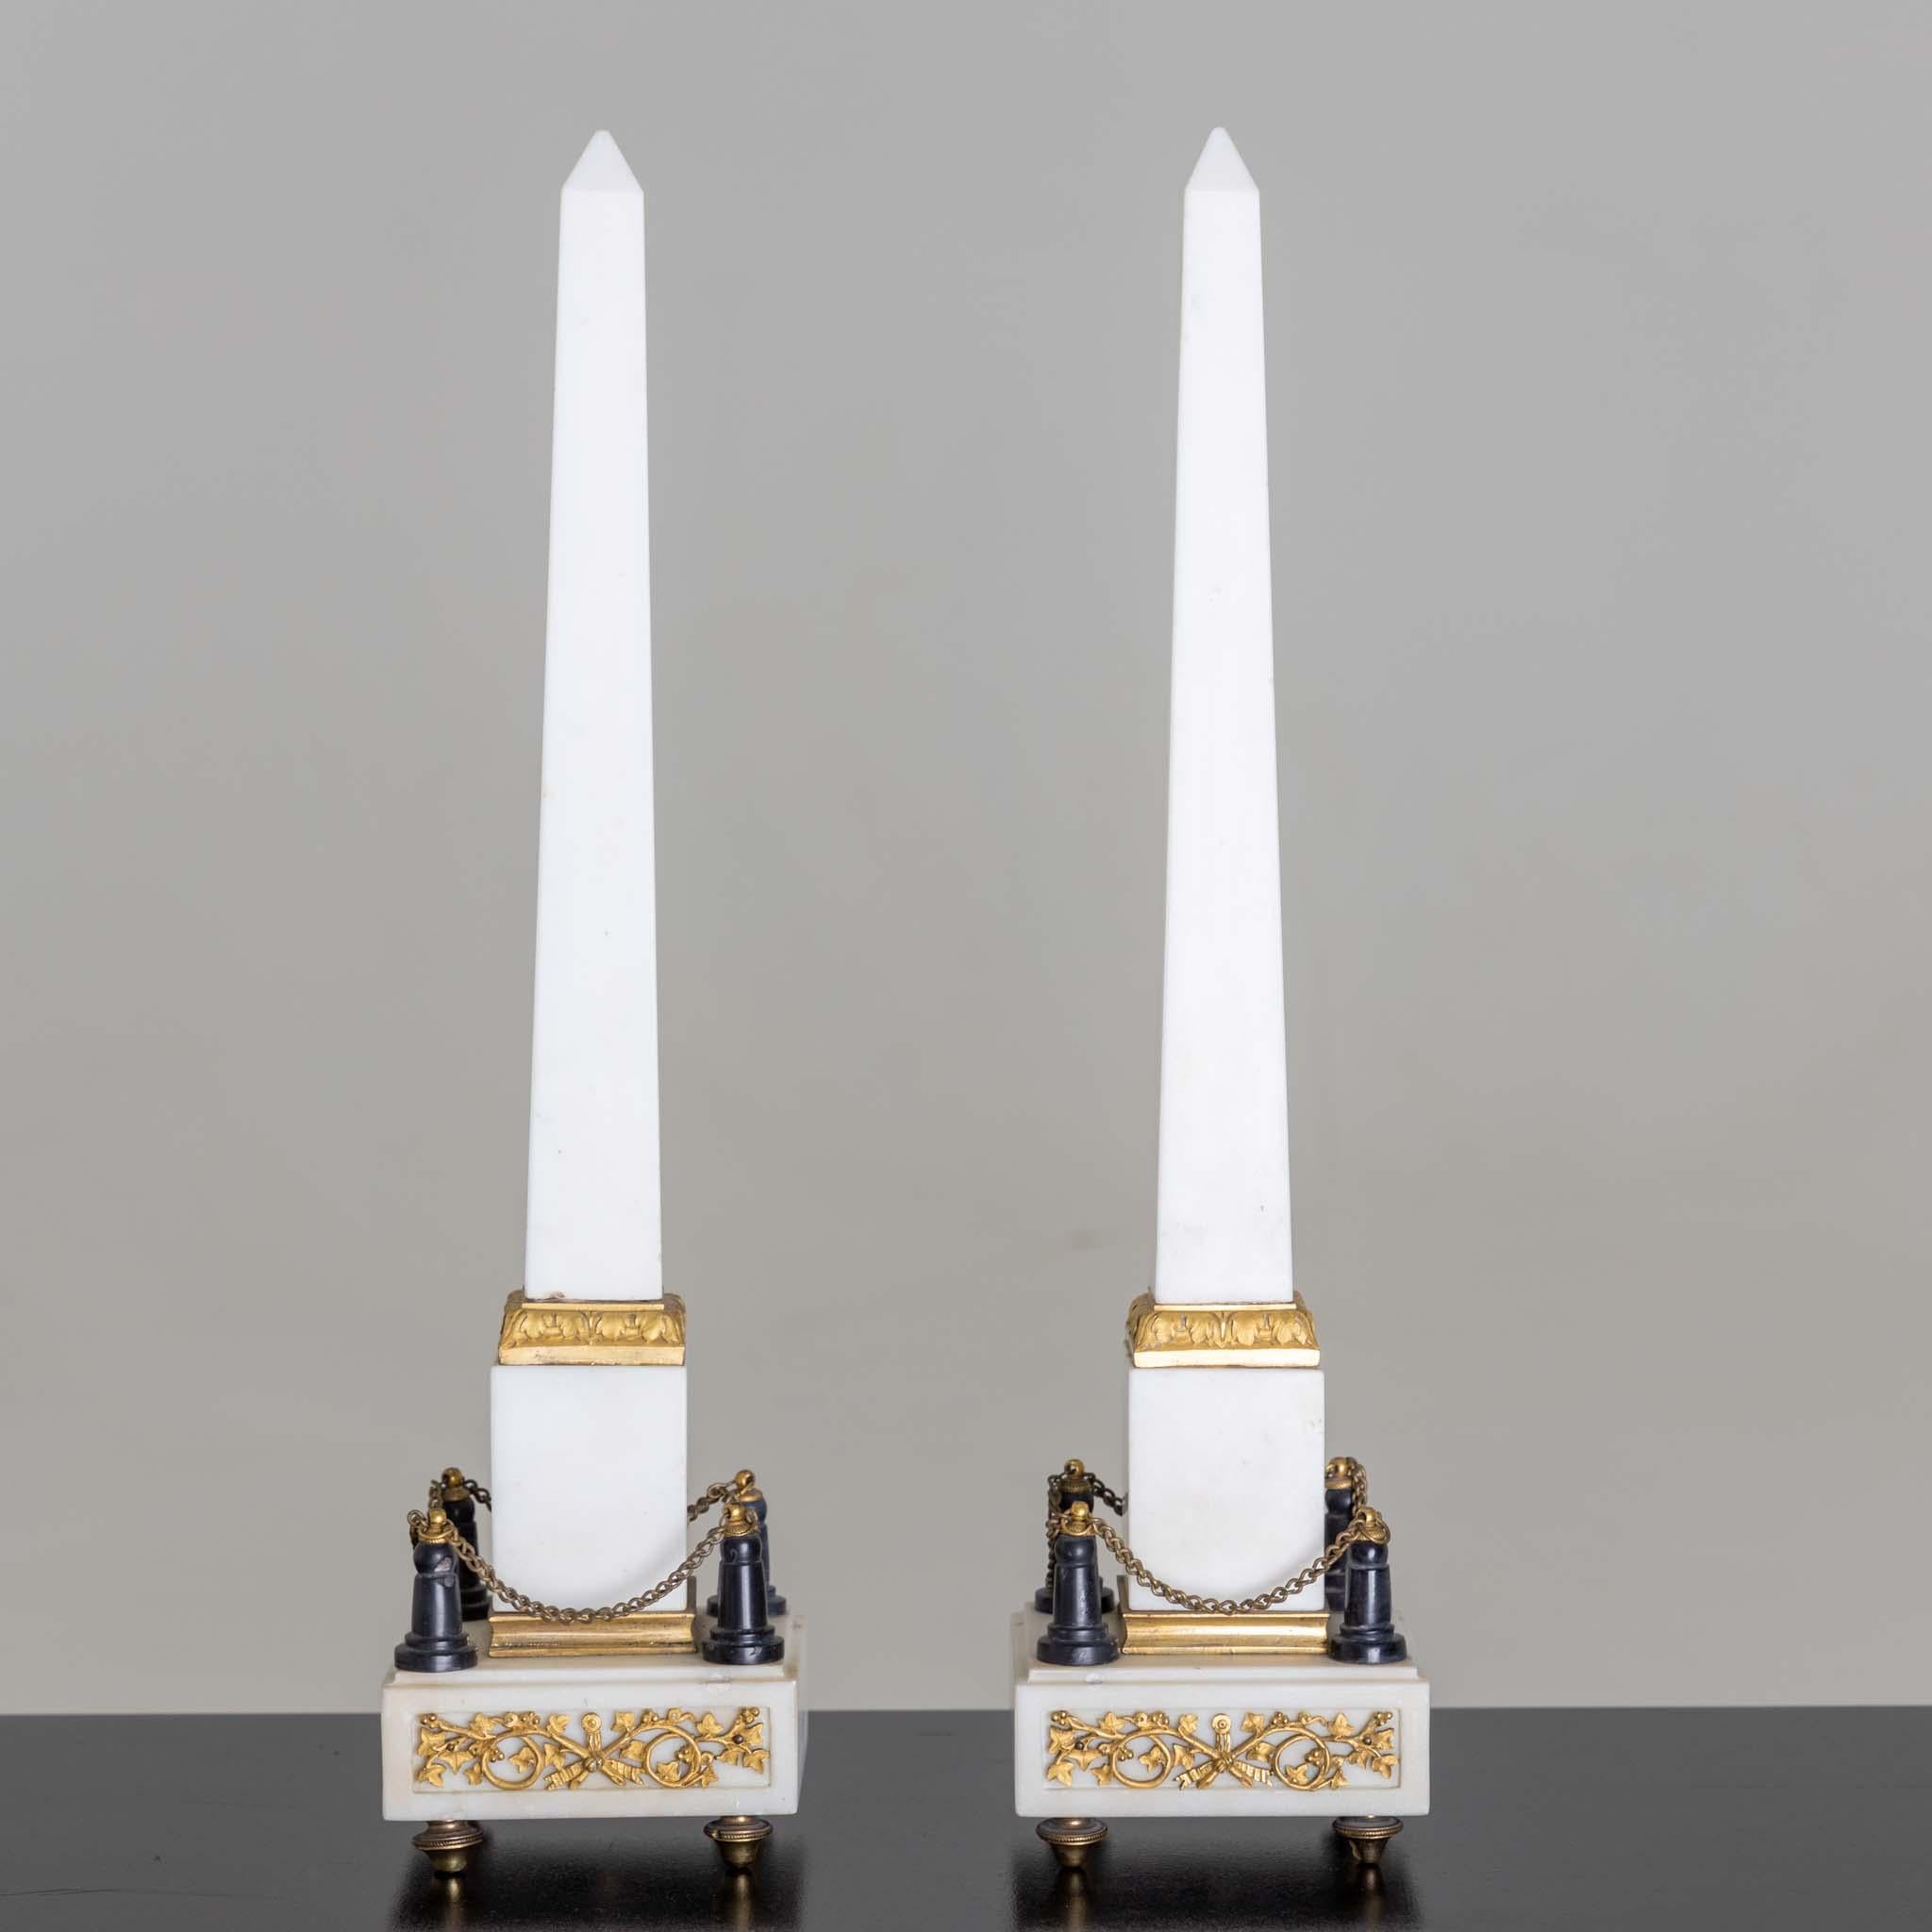 Pair of white marble obelisks with fire-gilded bronze mounts.